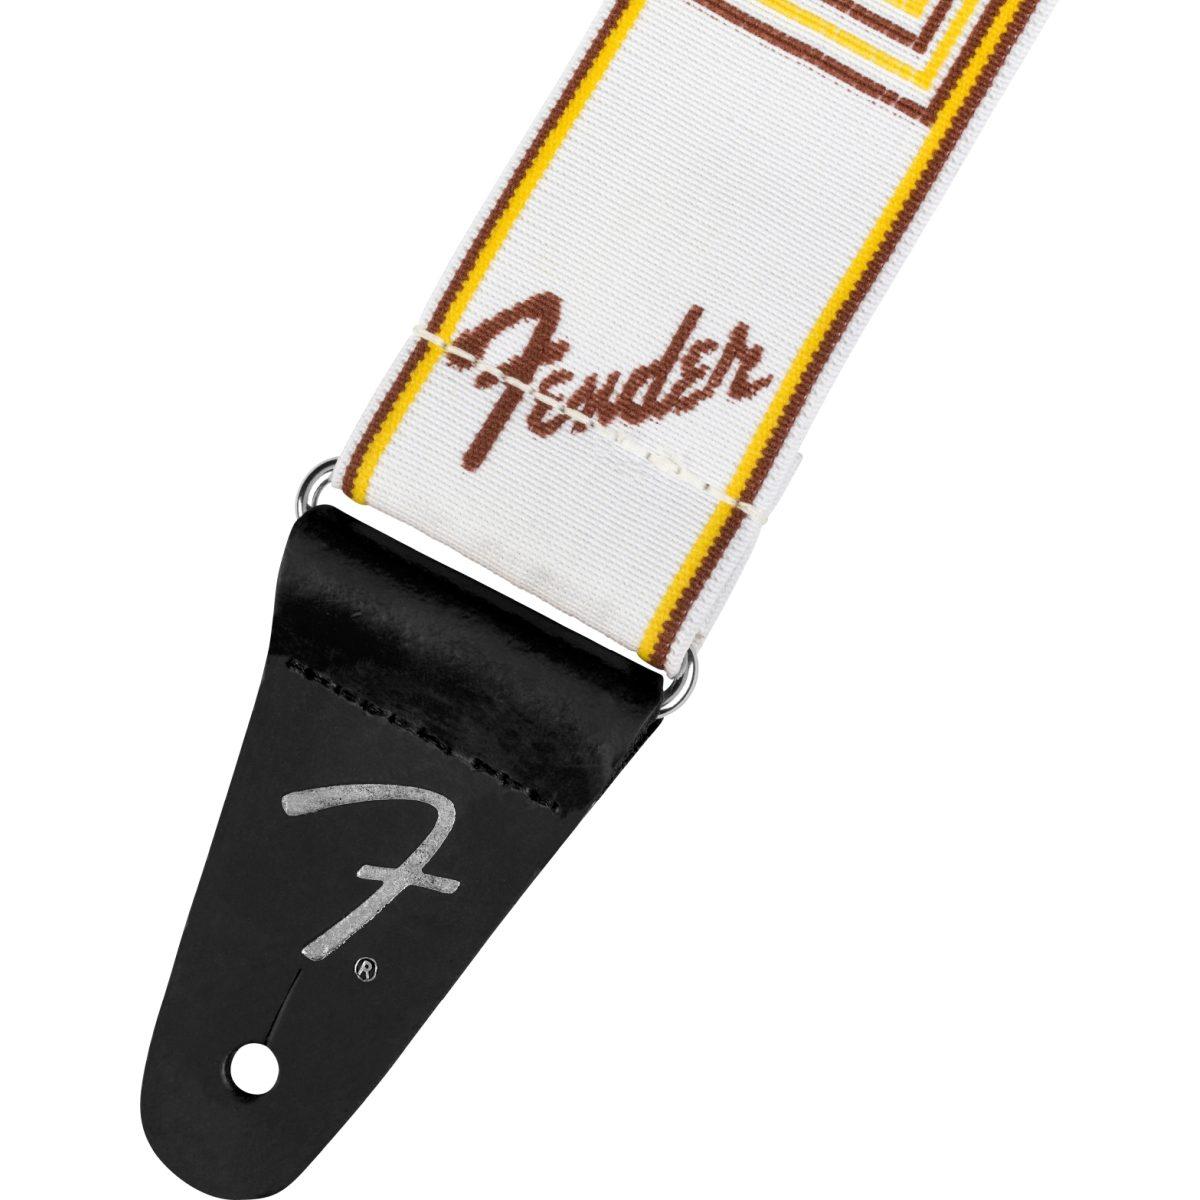 Fender weighless monogram tracolla per chitarra white, brown , yellow